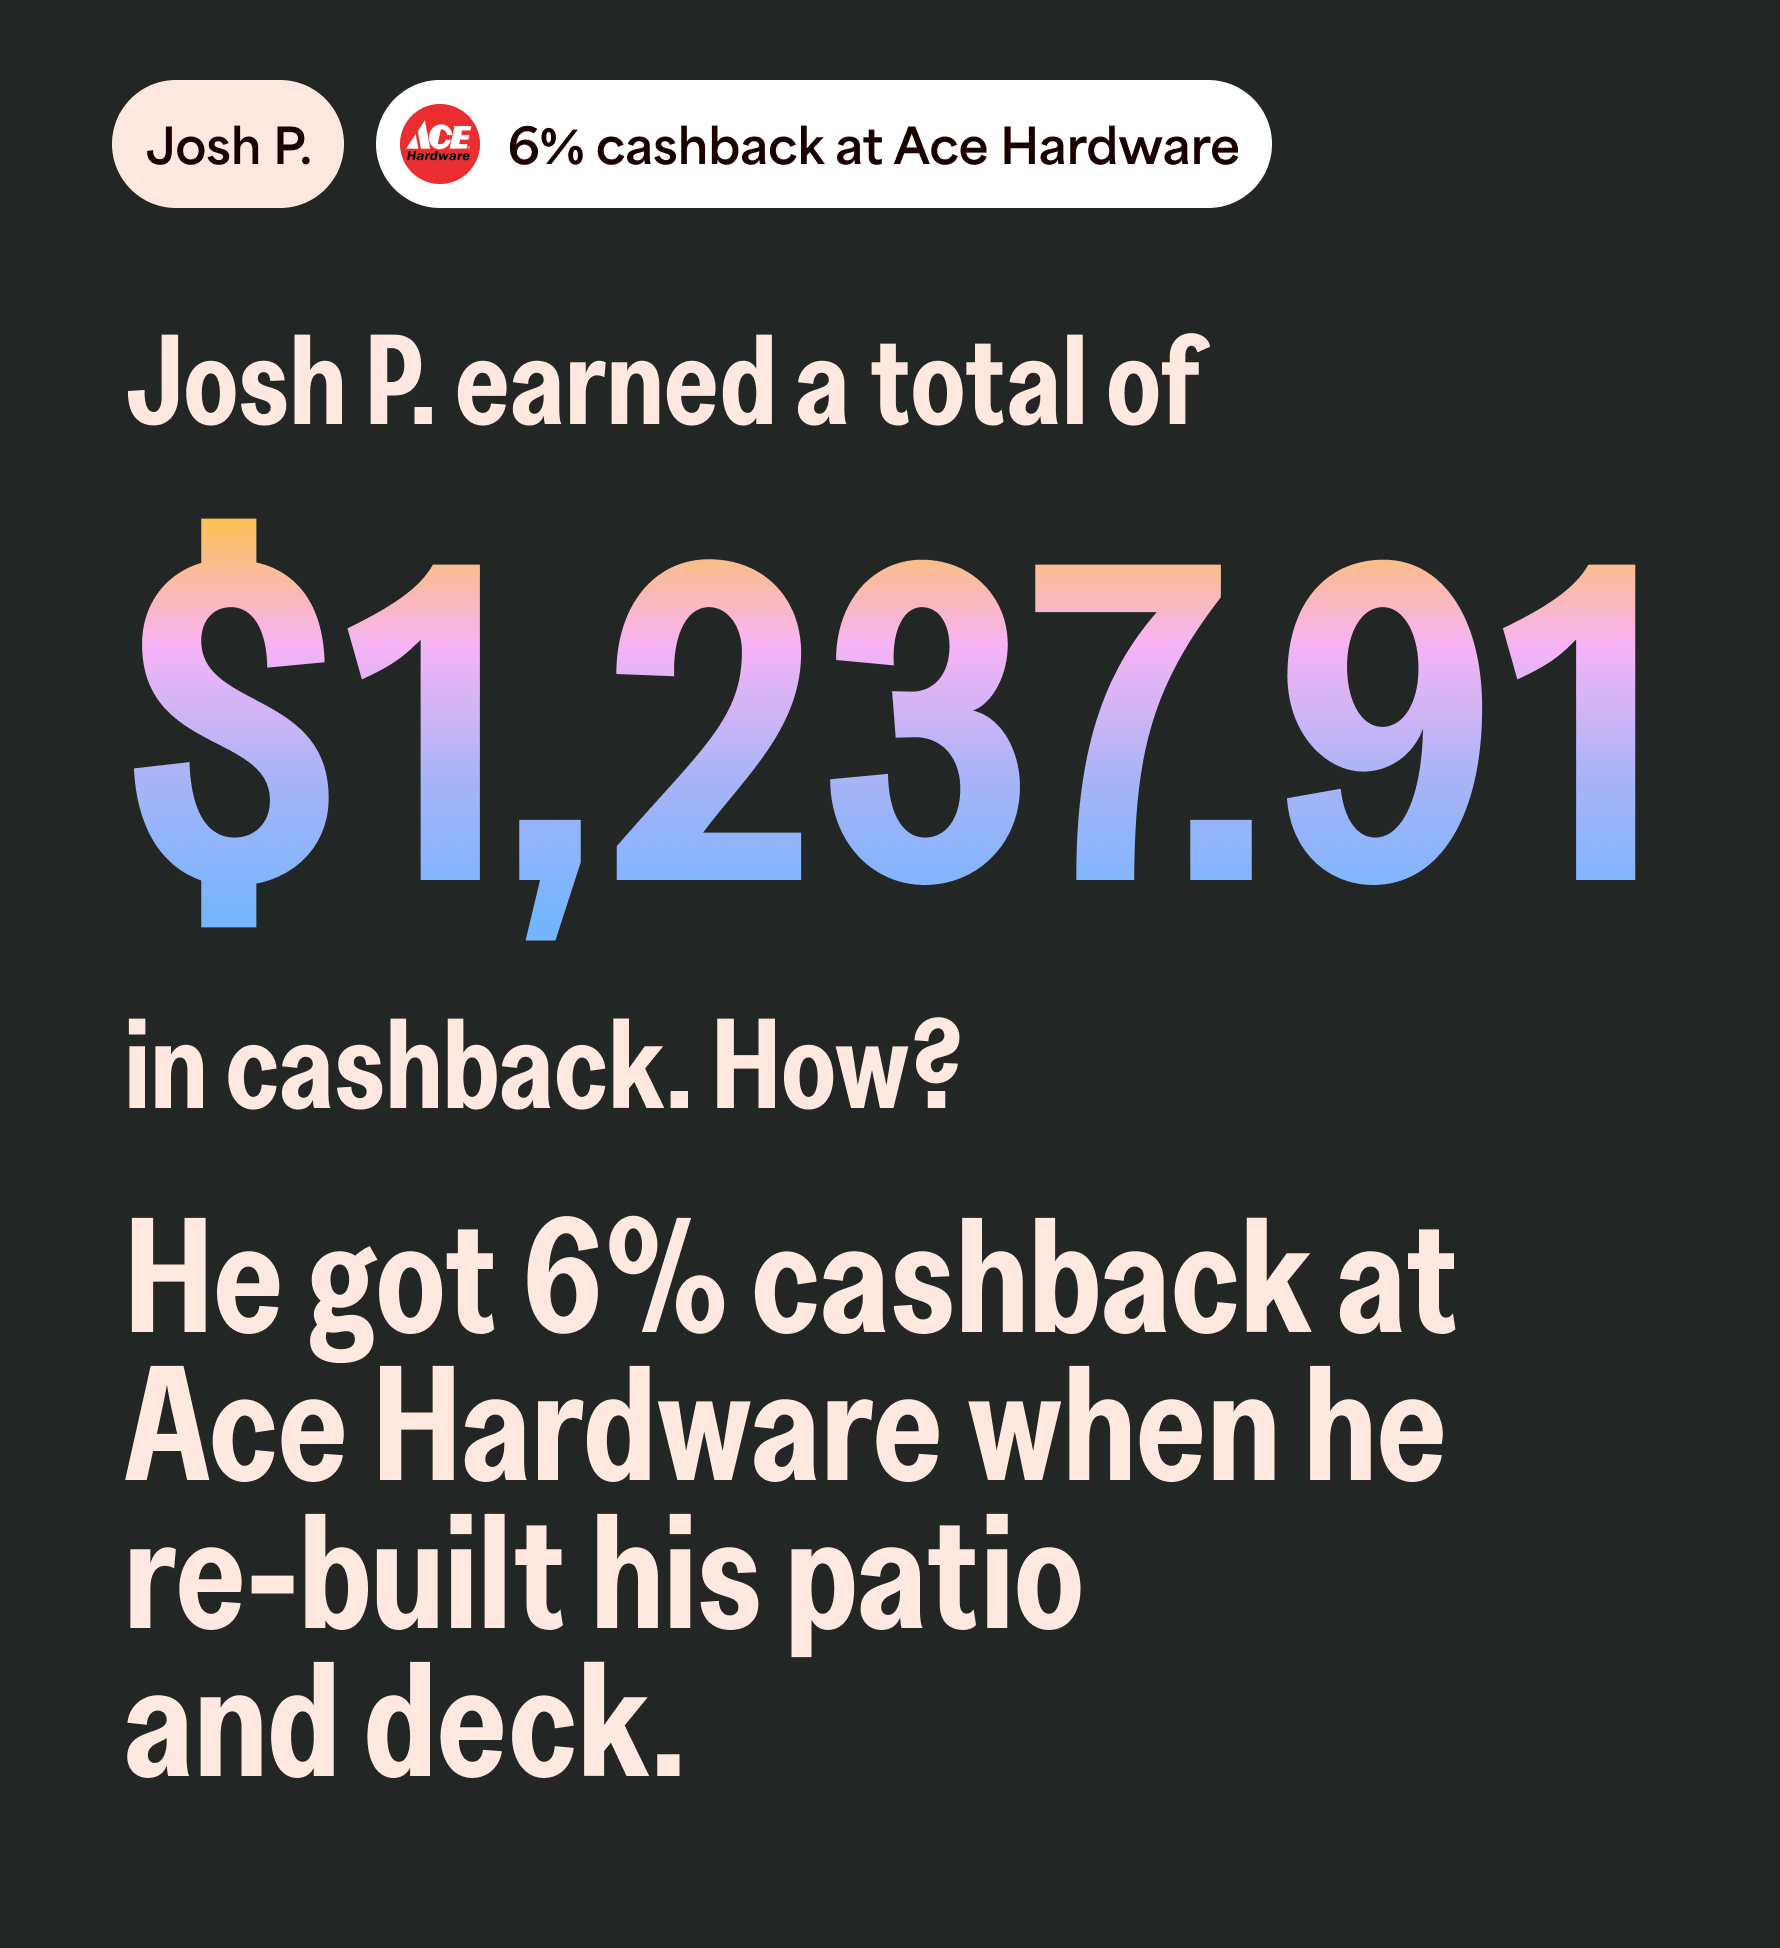 Josh P. 6% cashback at Ace Hardware. Josh P. earned a total of $1,237.91 in cashback. How? He got 6% cashback at Ace Hardware when he re-built his patio and deck.